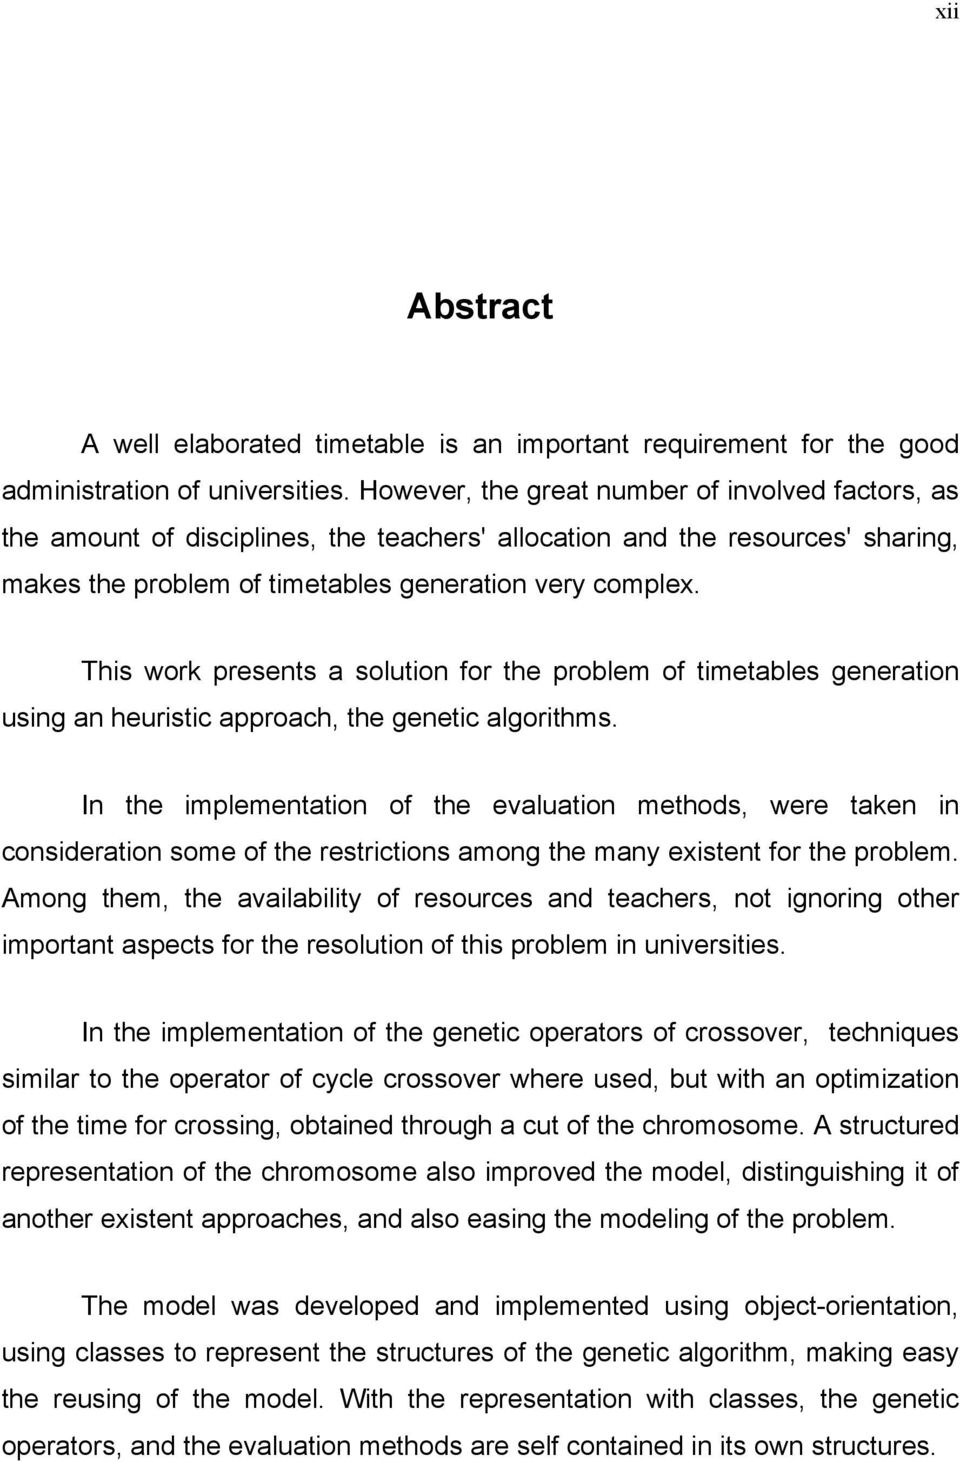 This work presents a solution for the problem of timetables generation using an heuristic approach, the genetic algorithms.